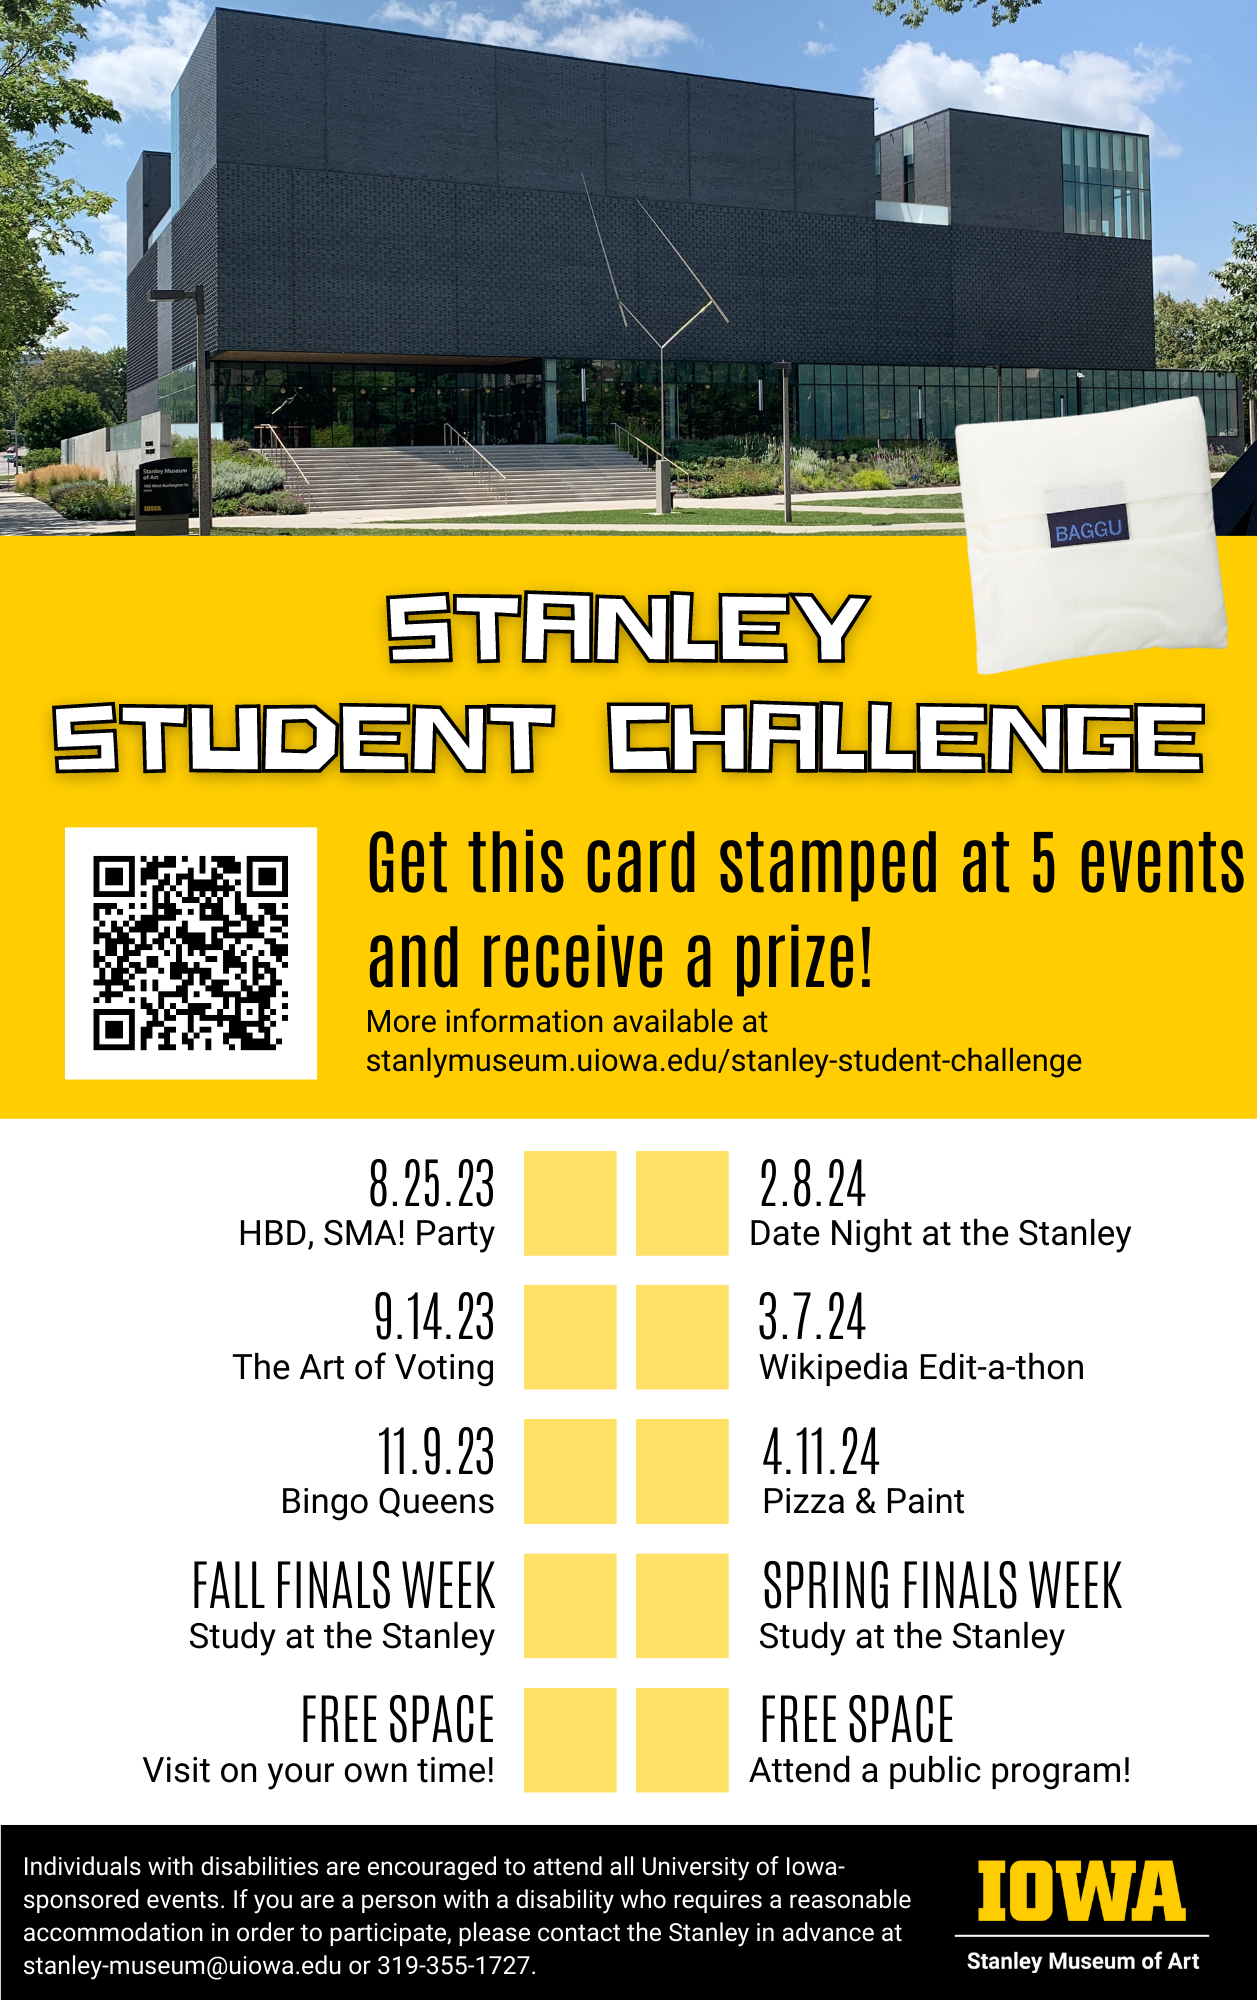 A flyer for the Stanley Student Challenge--it features an image of the Stanley Museum of Art building, and lists ten separate events for students that will occur during academic year 2023 - 2024.